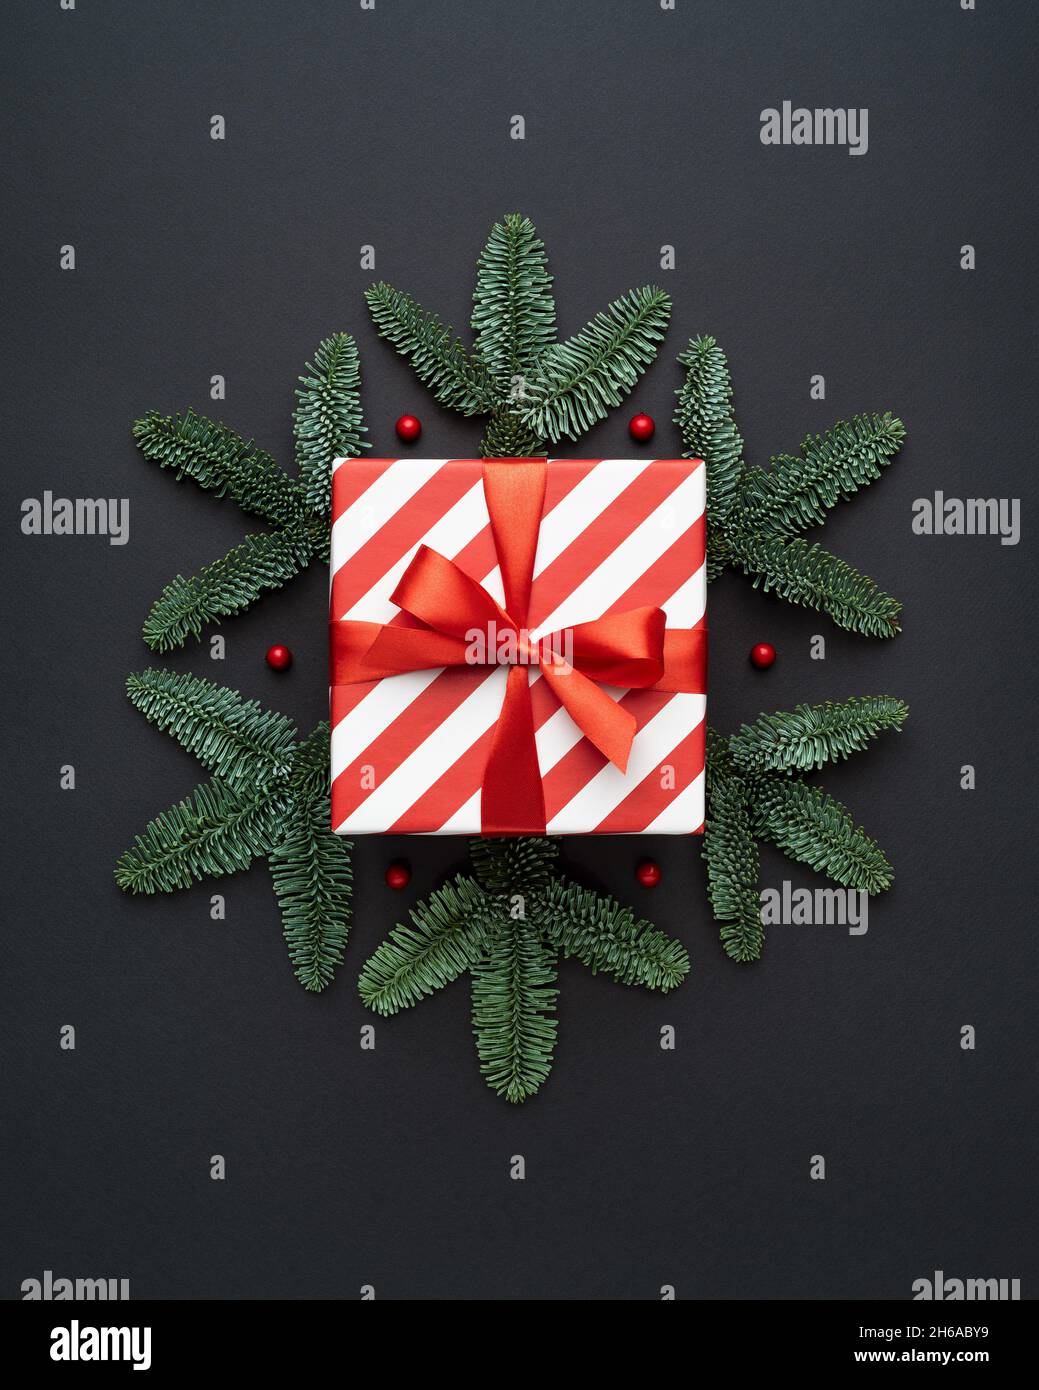 Christmas card with gift box and decorative snowflake on black background Stock Photo